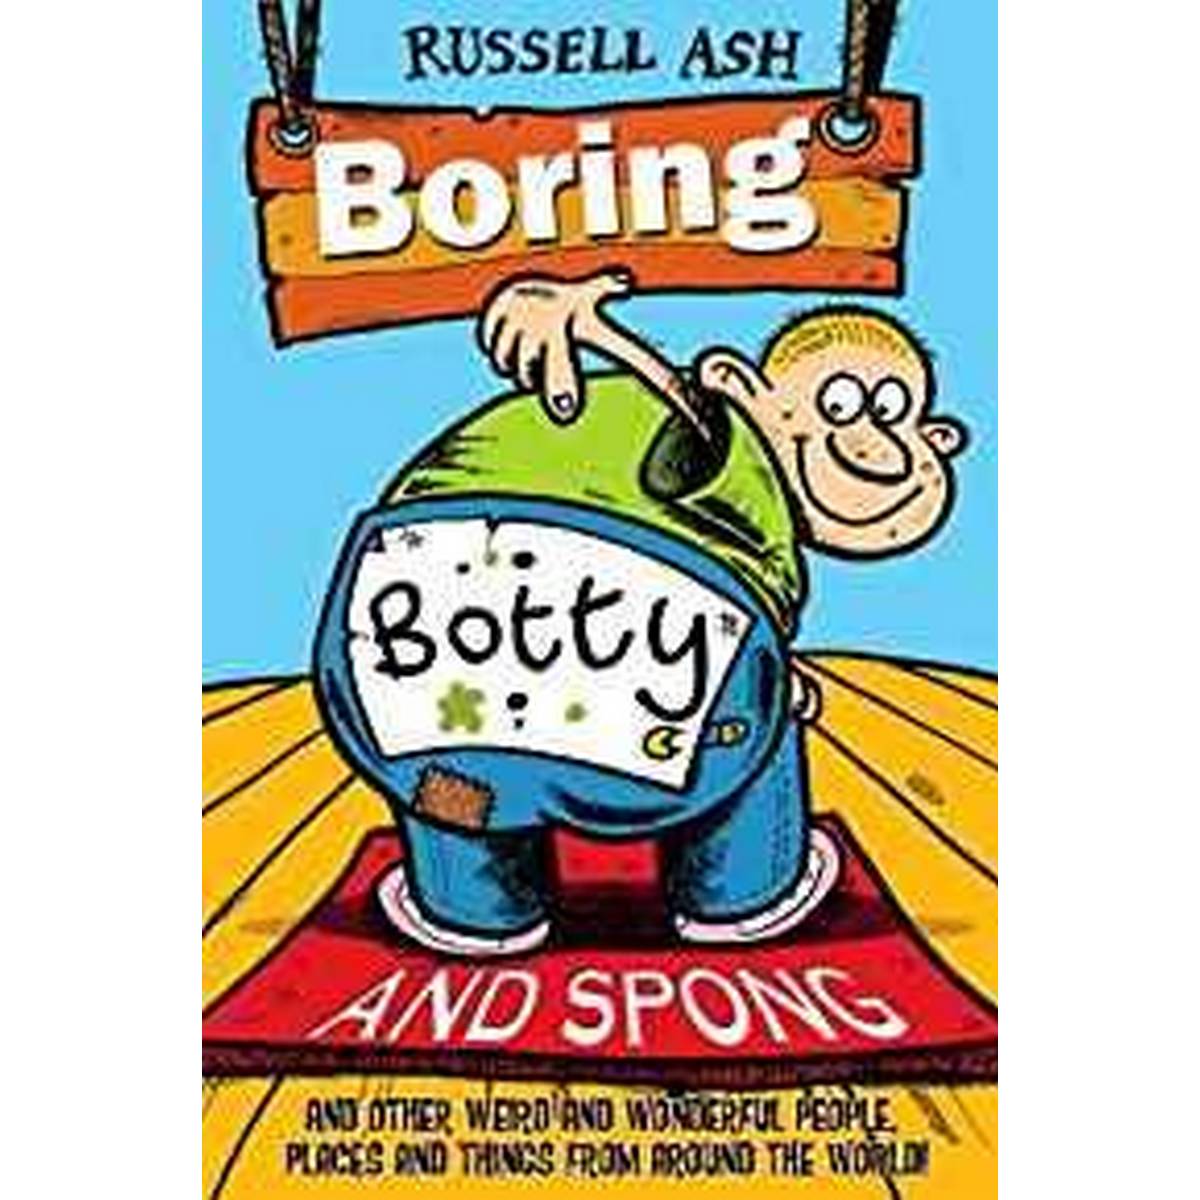 Boring, Botty and Spong